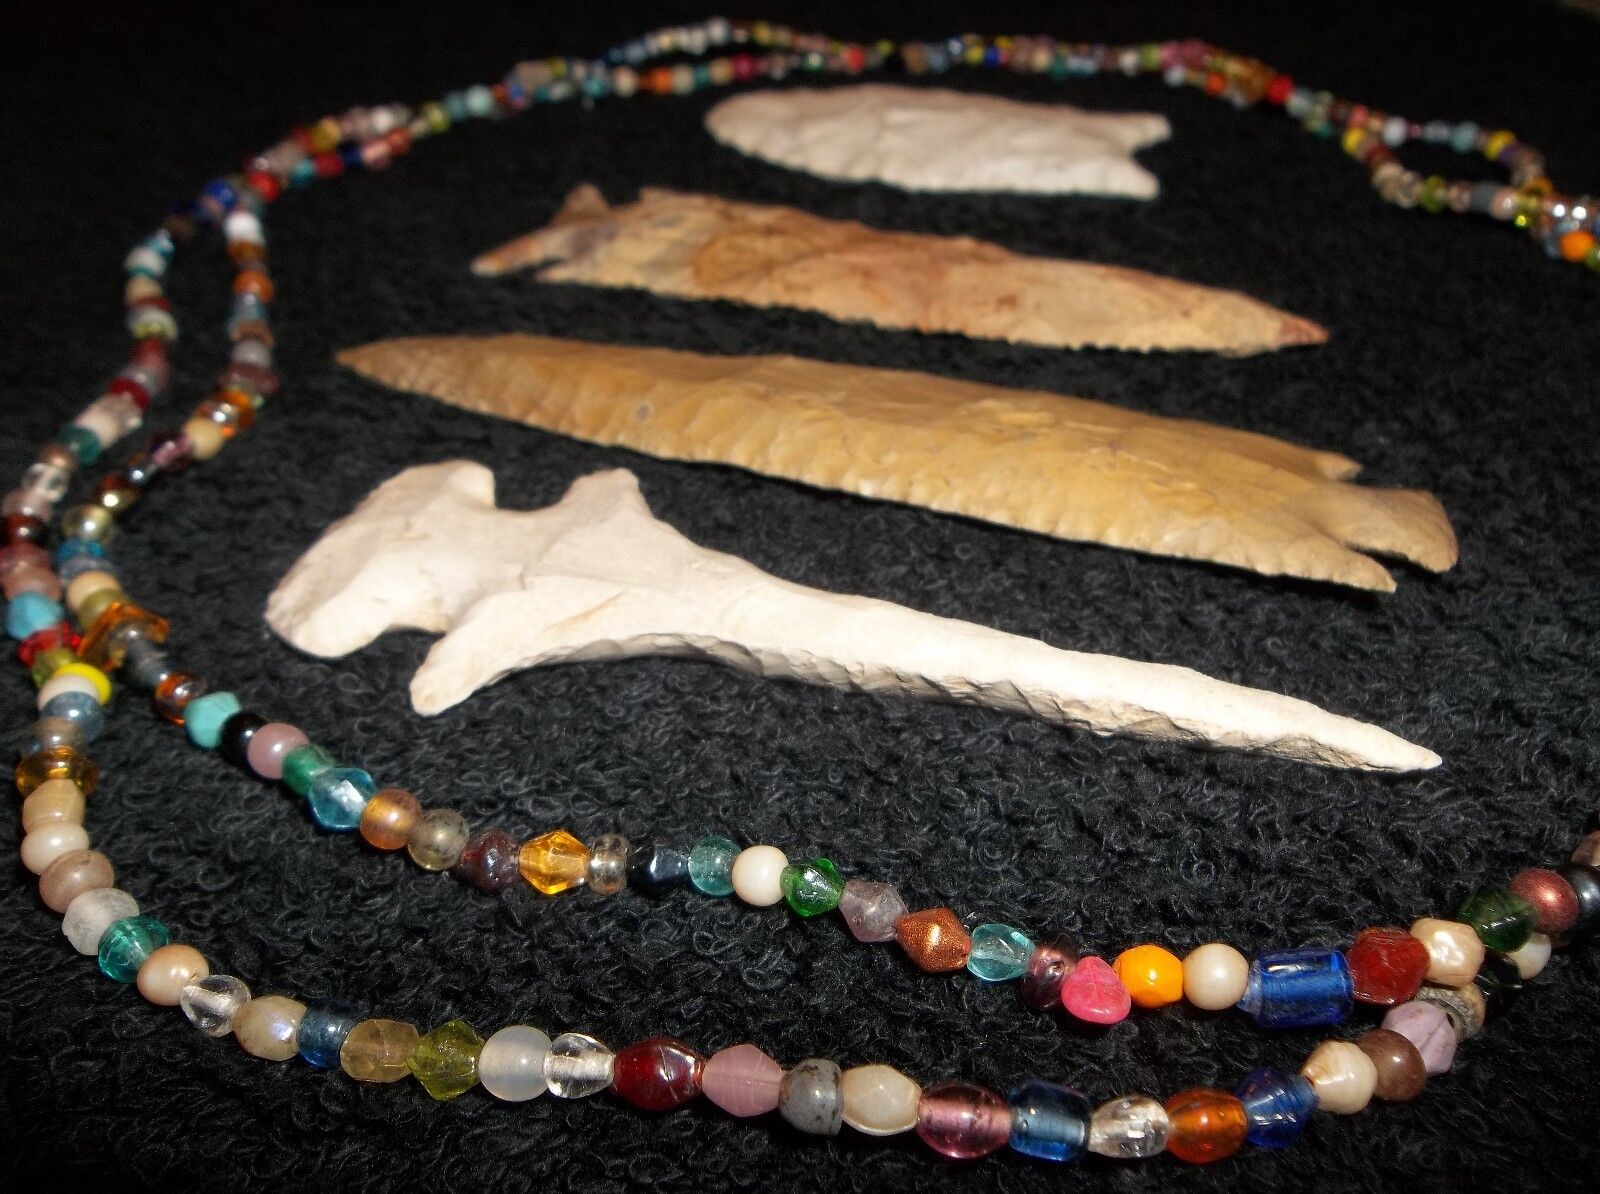 4 FOOT LONG STRAND OF GREAT OLD TRADE BEAD NECKLACE GLASS BEADS BEAUTIFUL COLORS